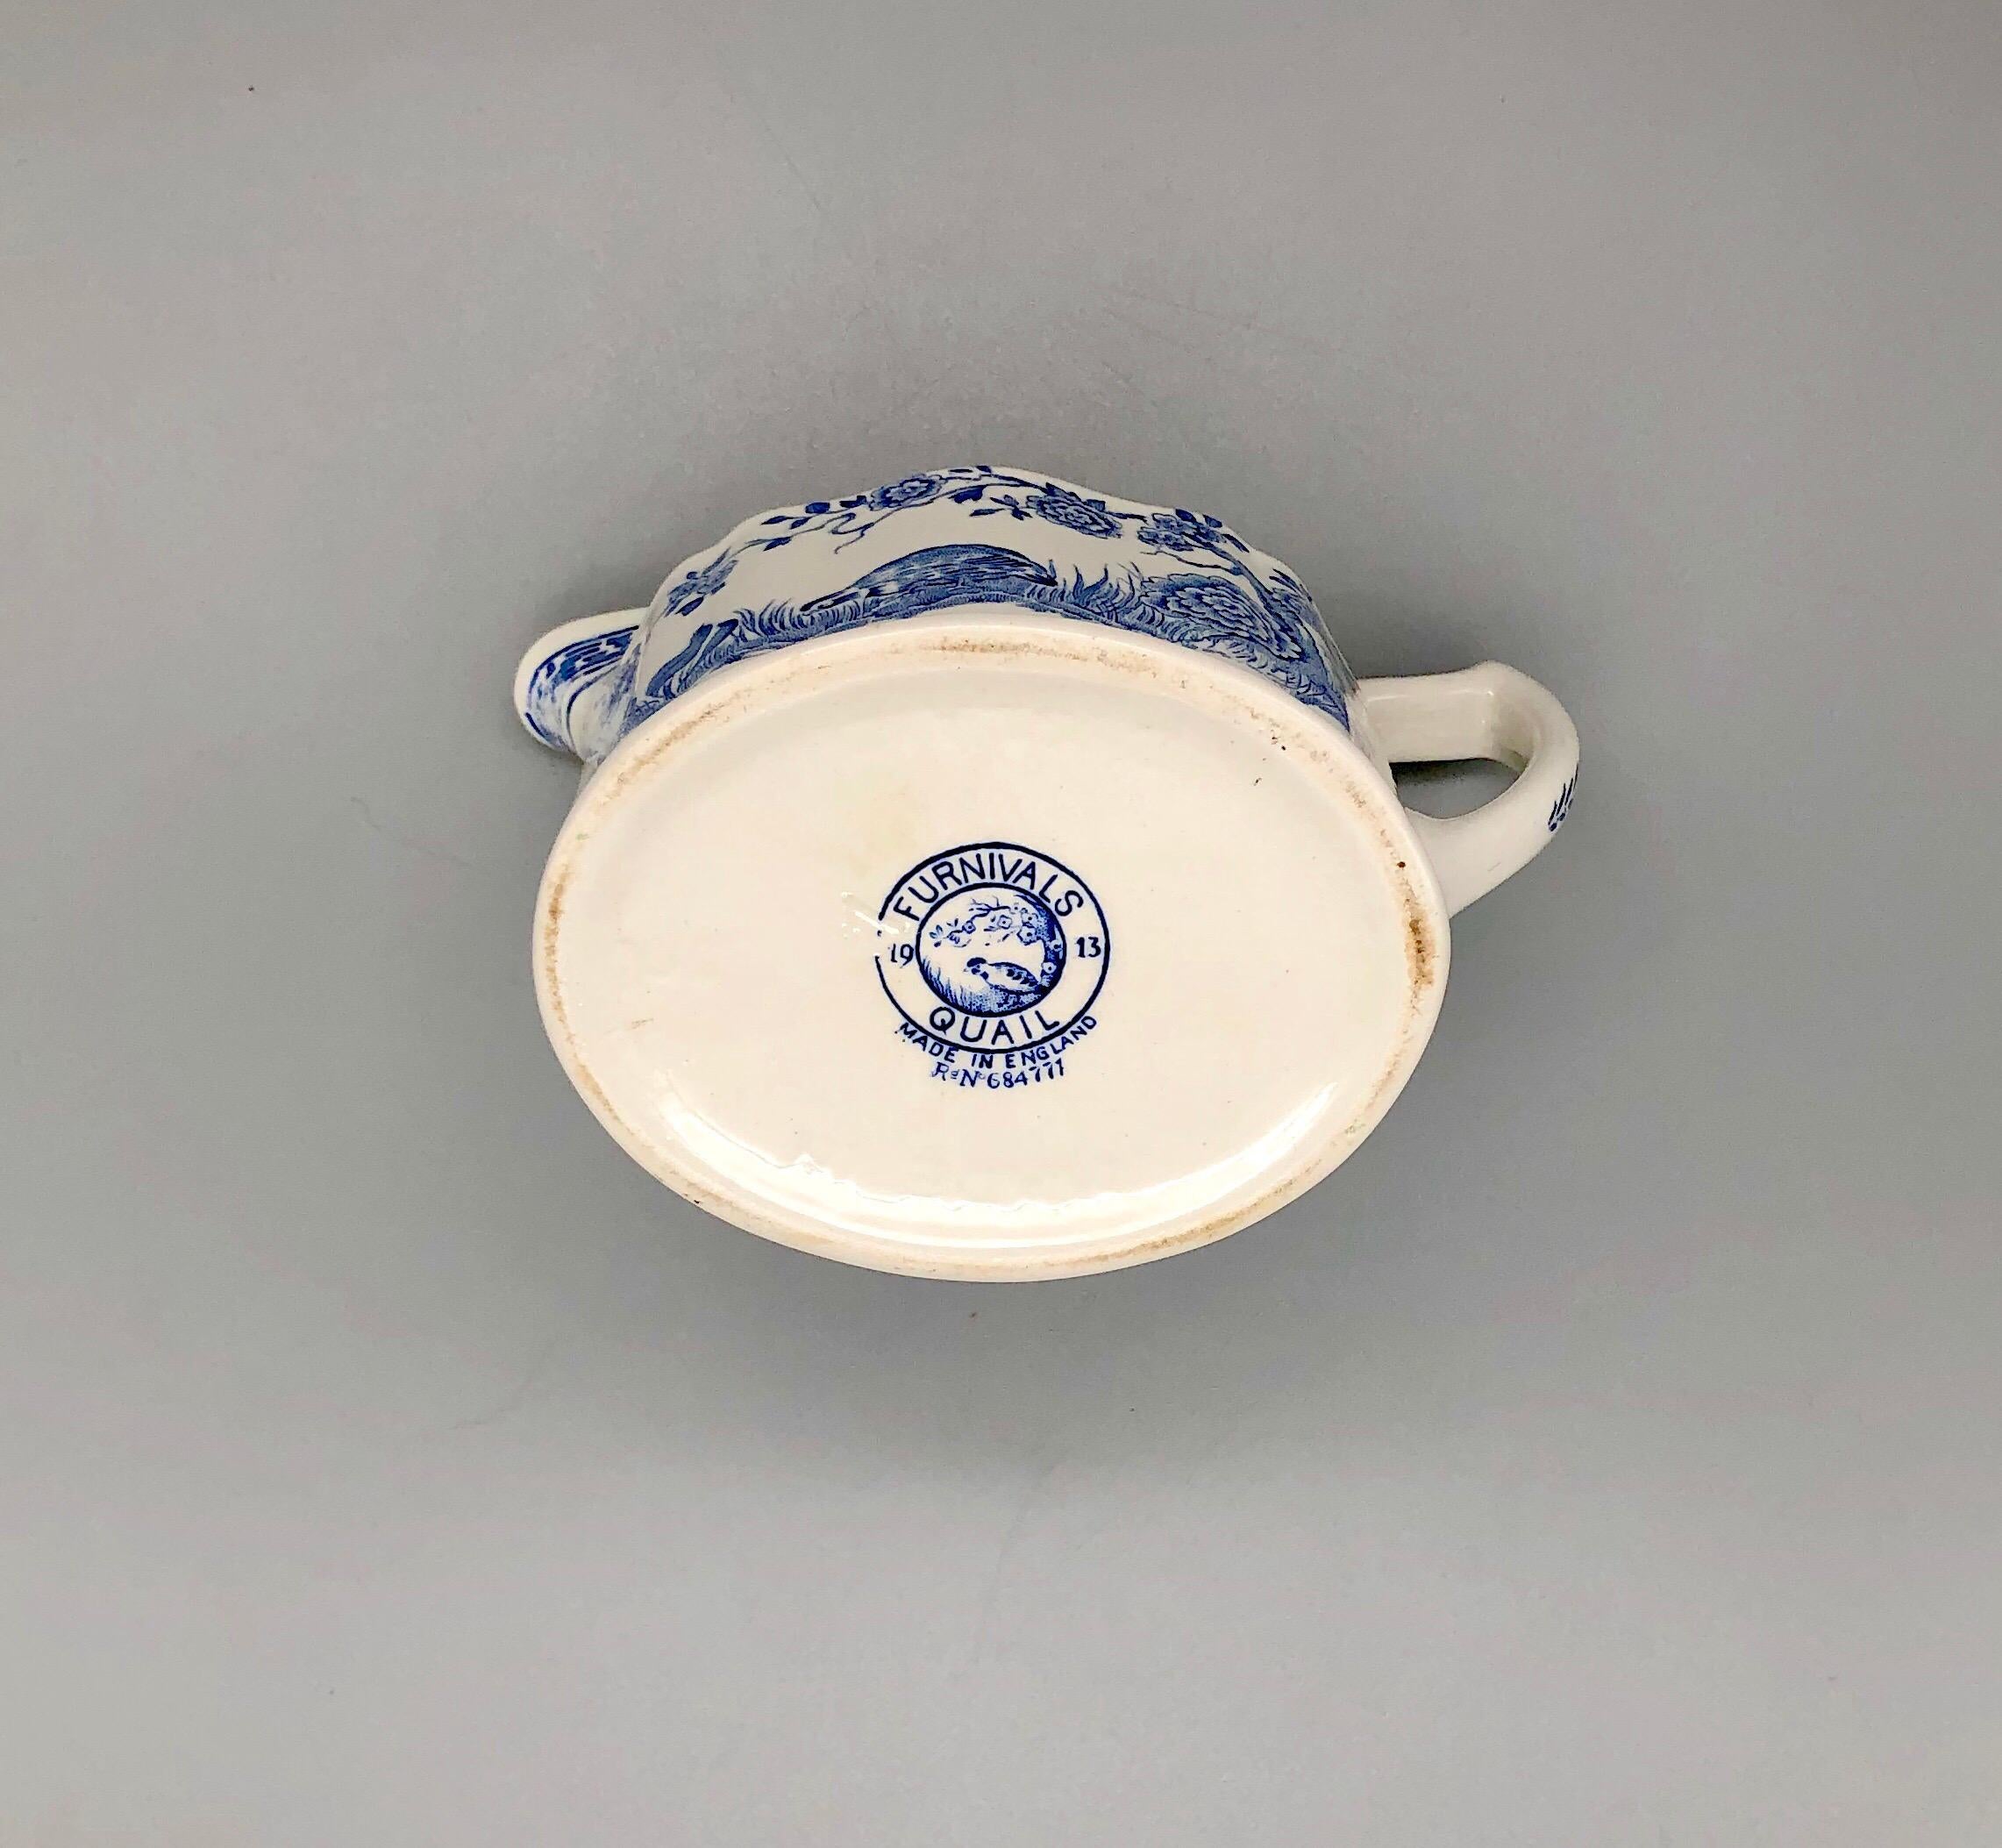 Blue and White Furnivals Quail 1913 Pottery Teapot, Creamer and Sugar Bowl Set For Sale 8